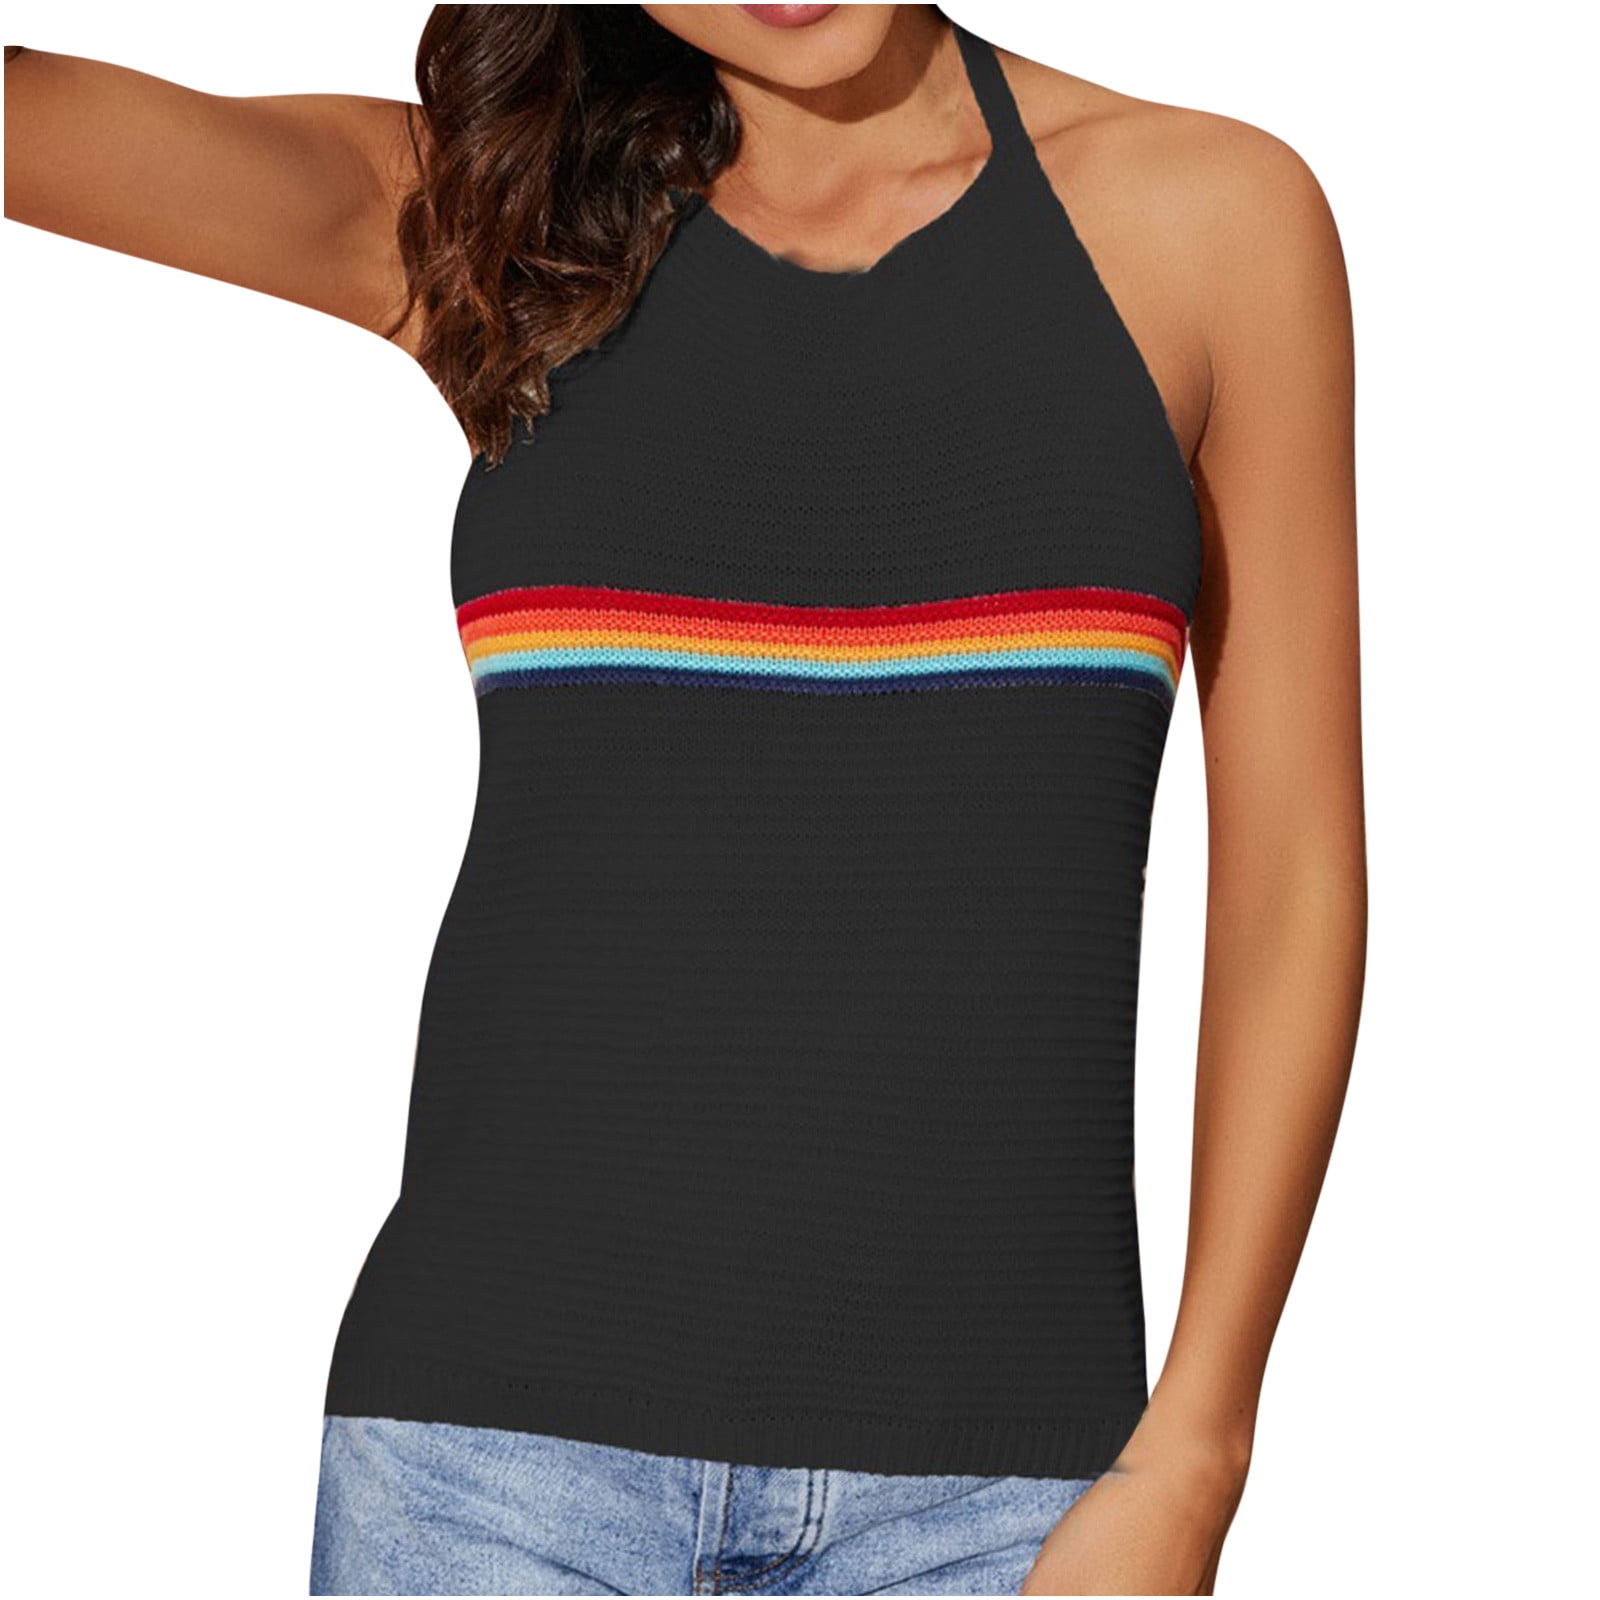 RQYYD Reduced Summer Crop Tops for Women's Sexy Sleeveless Tank